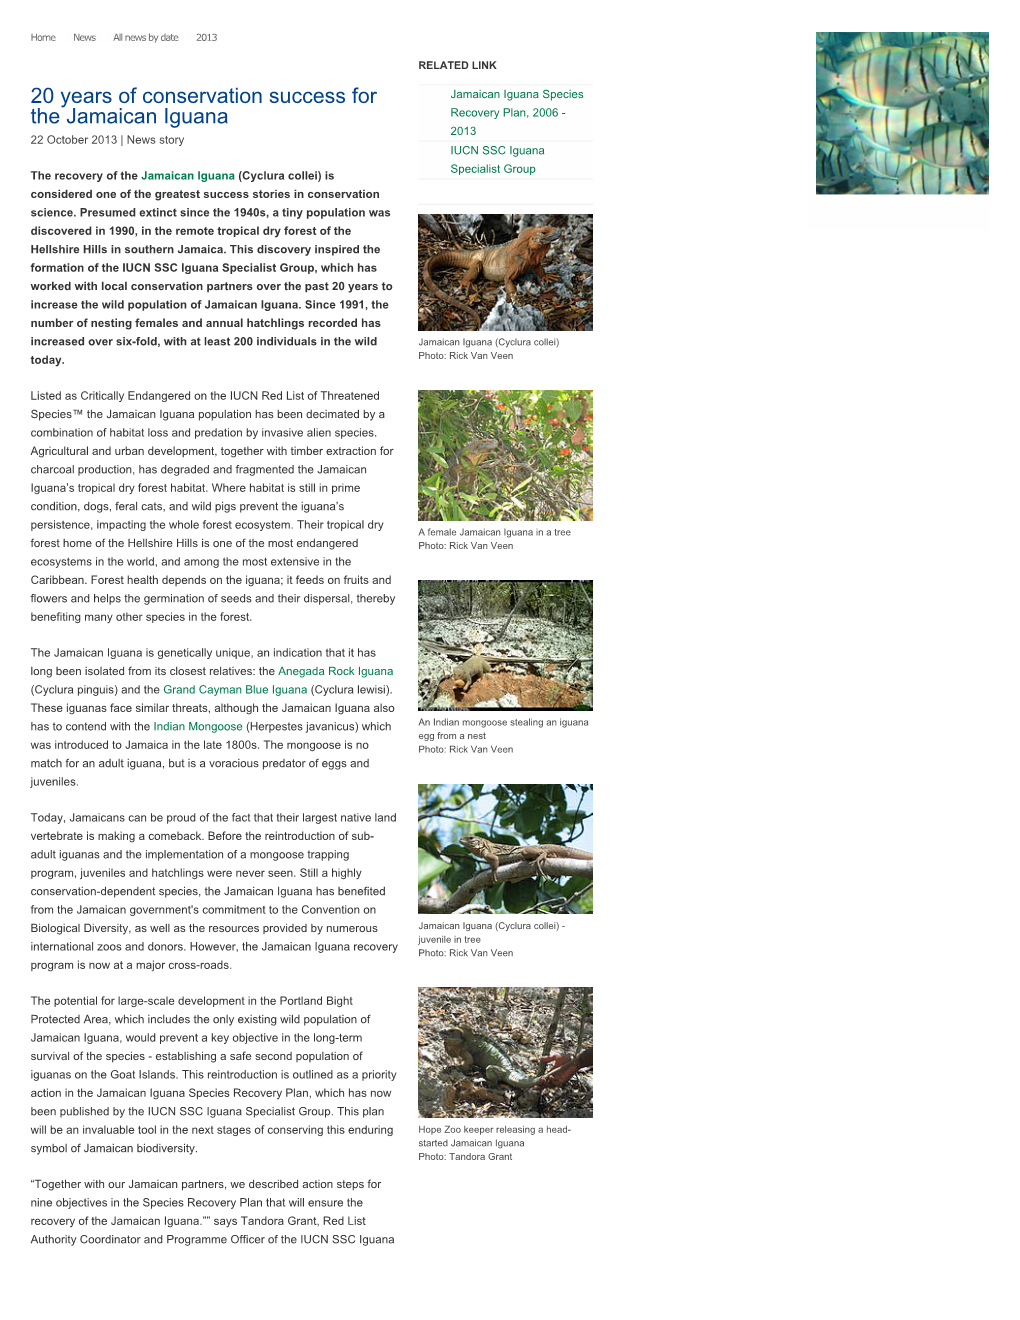 IUCN SSC Iguana Specialist Group the Recovery of the Jamaican Iguana (Cyclura Collei) Is Considered One of the Greatest Success Stories in Conservation Science